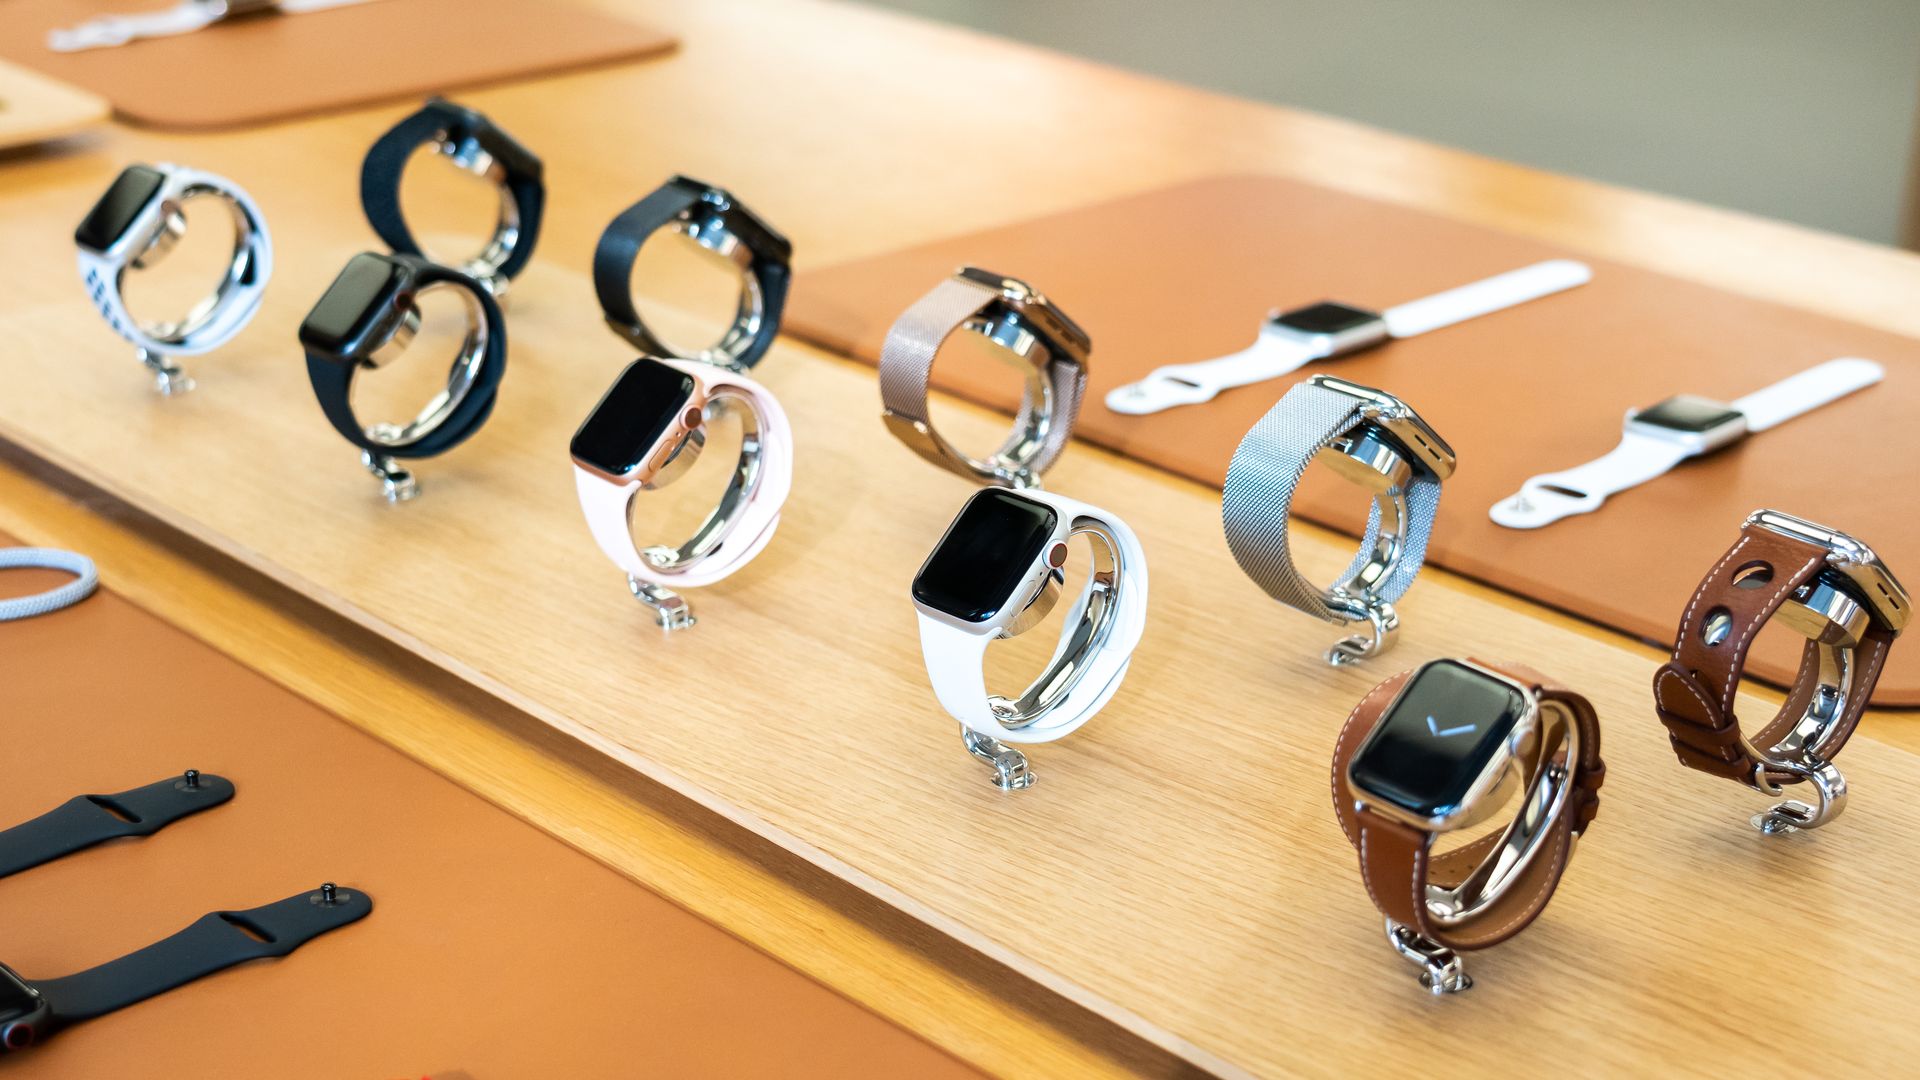 Display of Apple Watches on a wooden surface